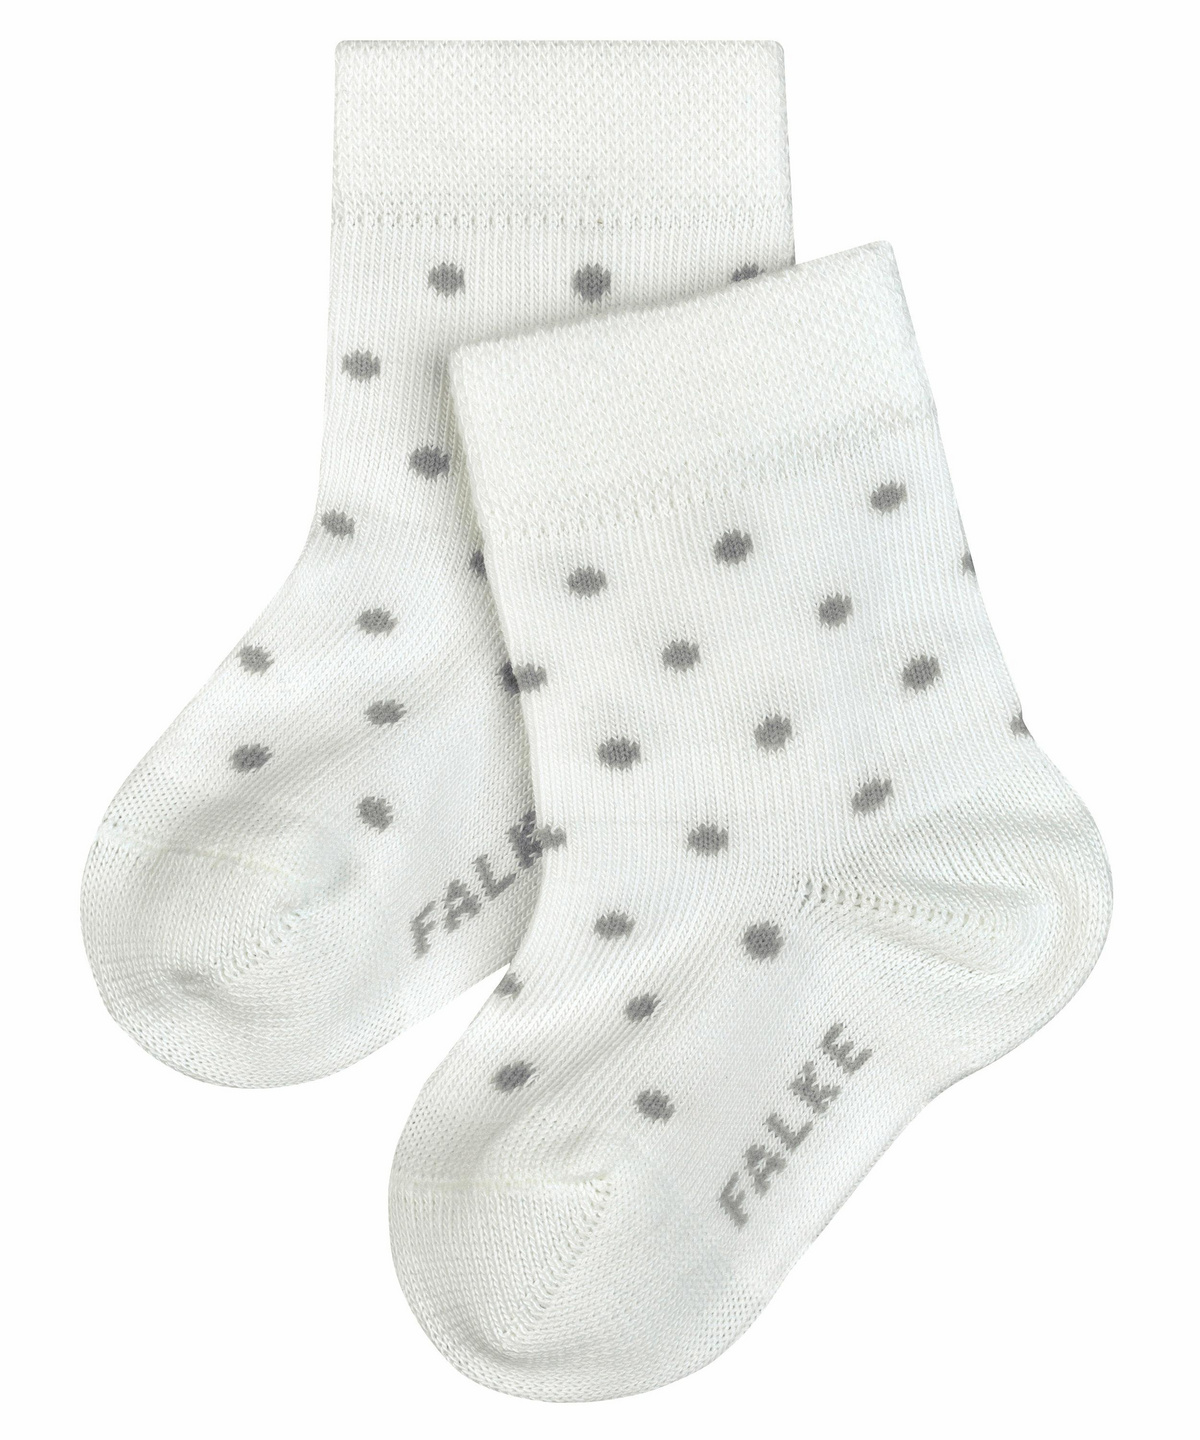 FALKE Unisex Baby Little Dot Socks Cotton Grey White More Colours Thin Light Colourful Calf Socks For Infant Boy Or Girl With Soft Top Non-Elastic Cuff Patterned 1 Pair